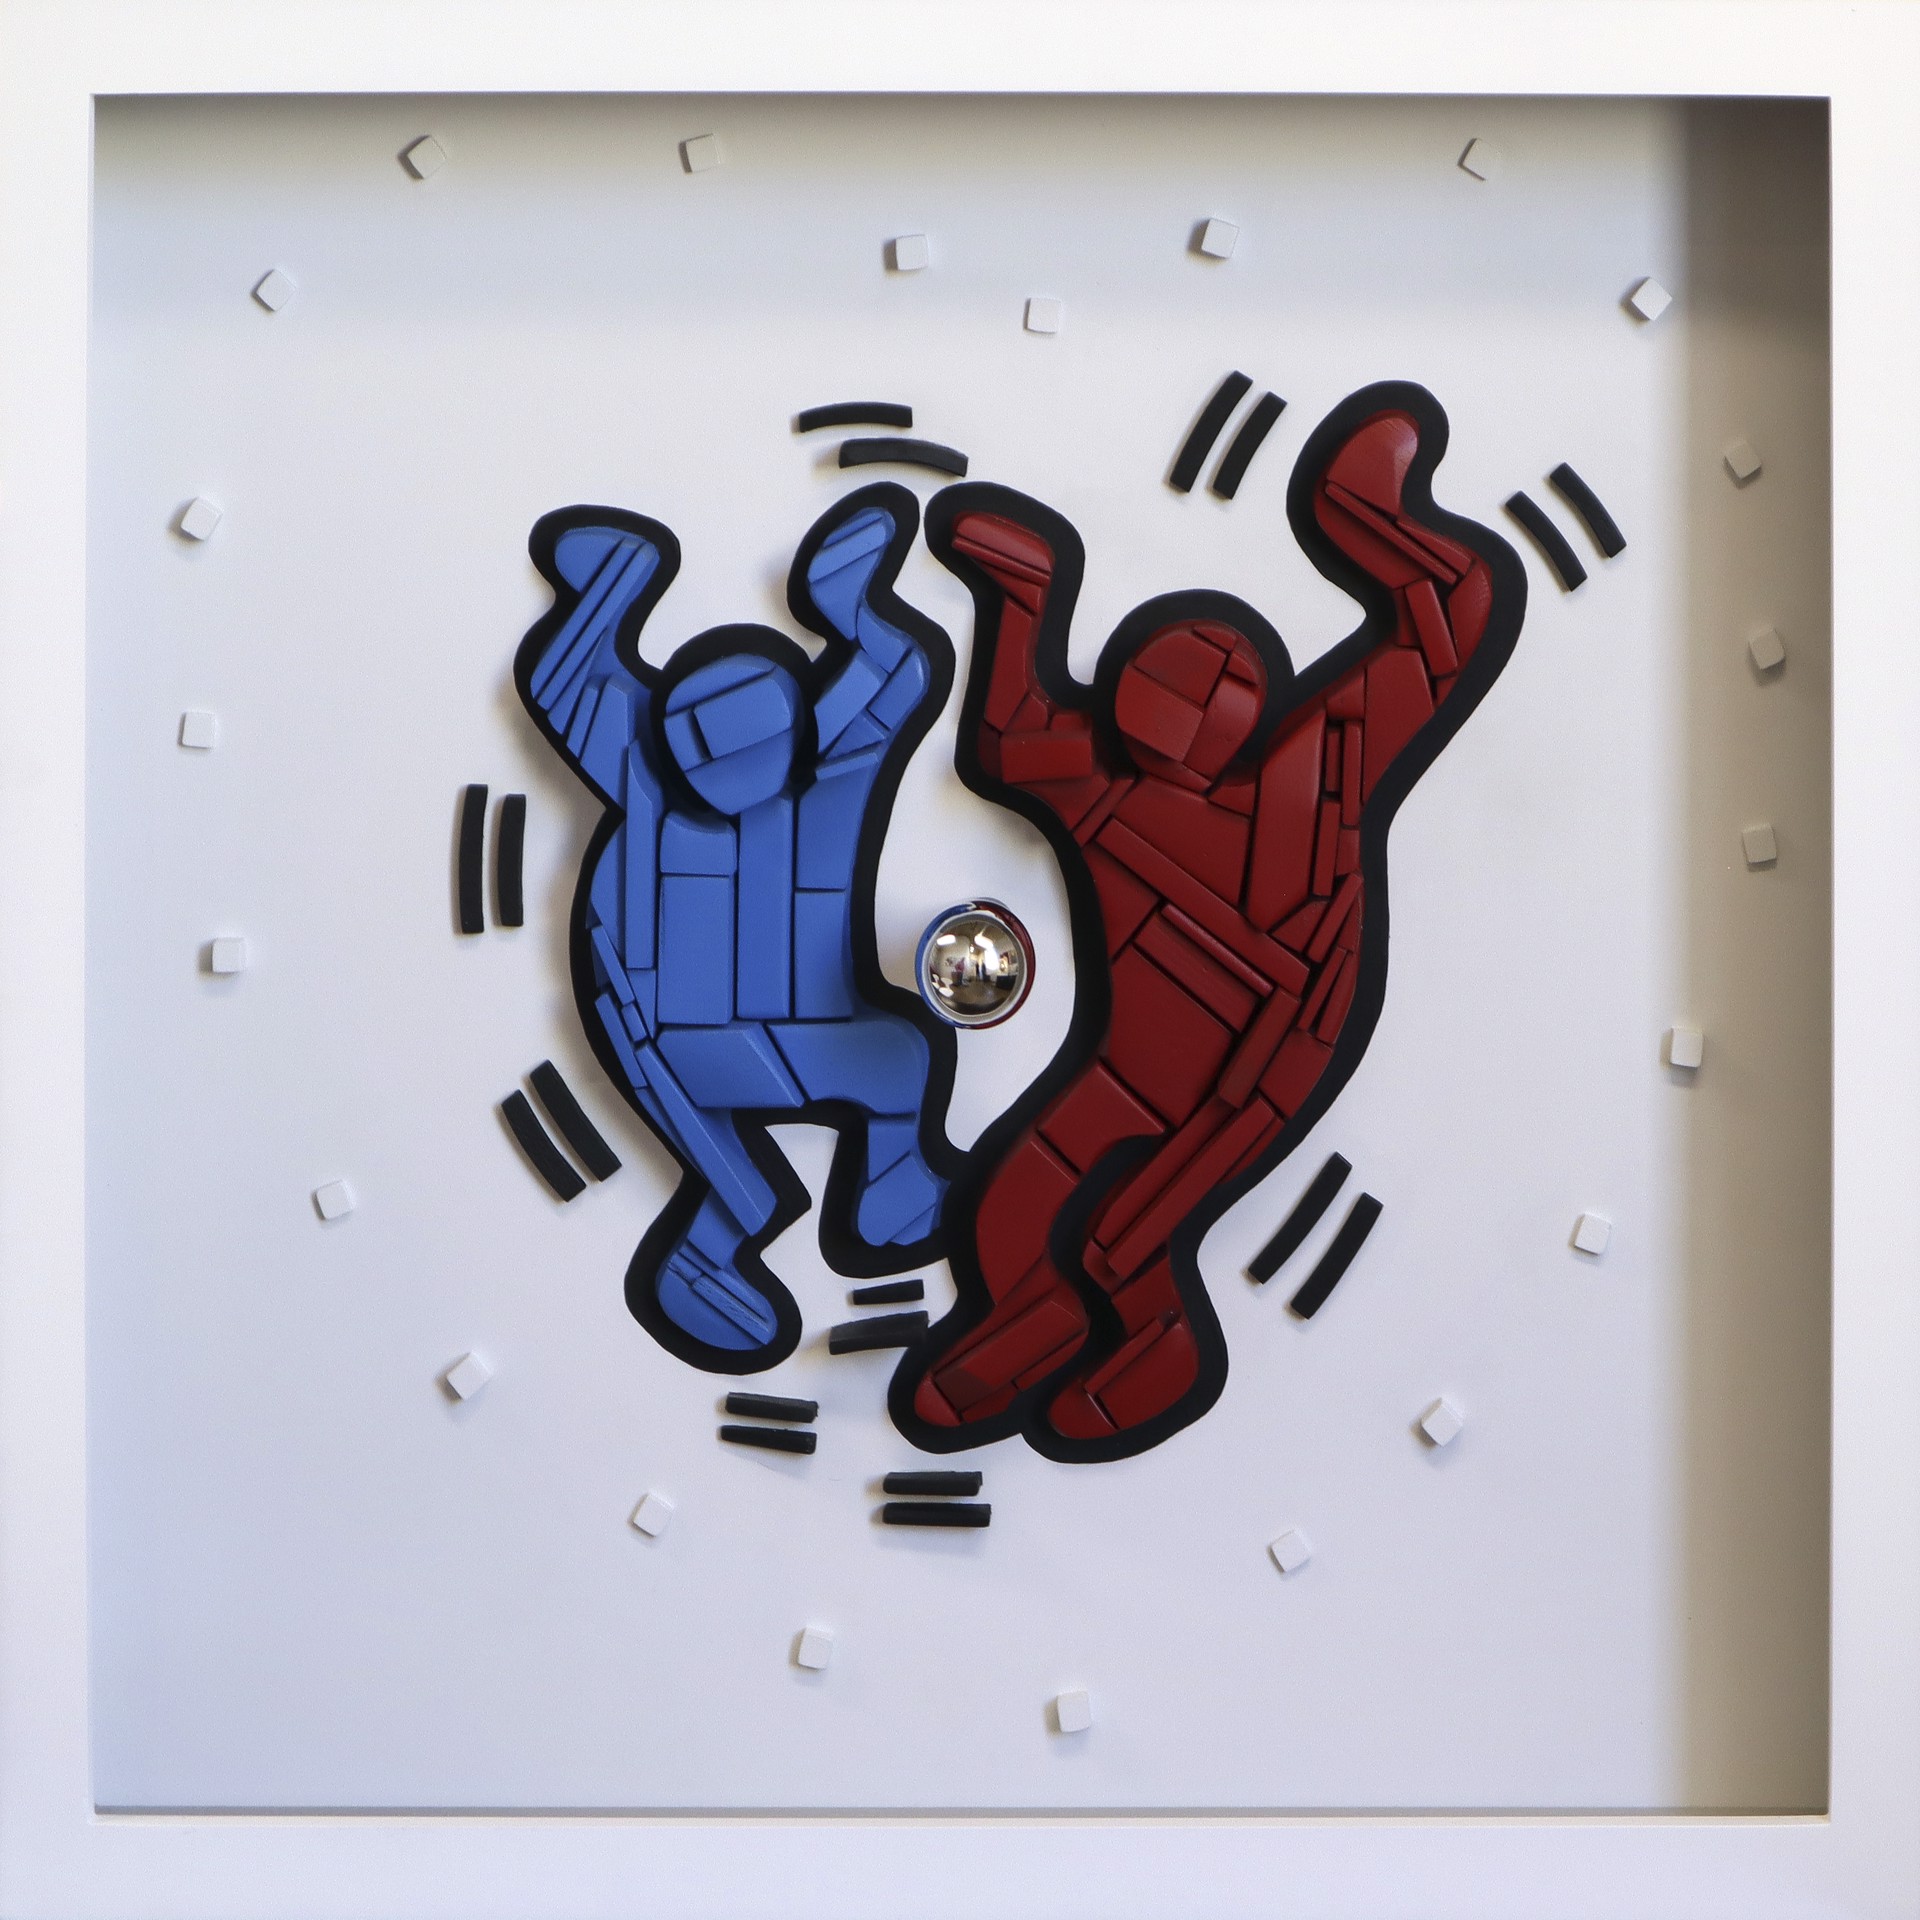 Buddy System (Homage to Haring) by J.P. Goncalves, Silhouette